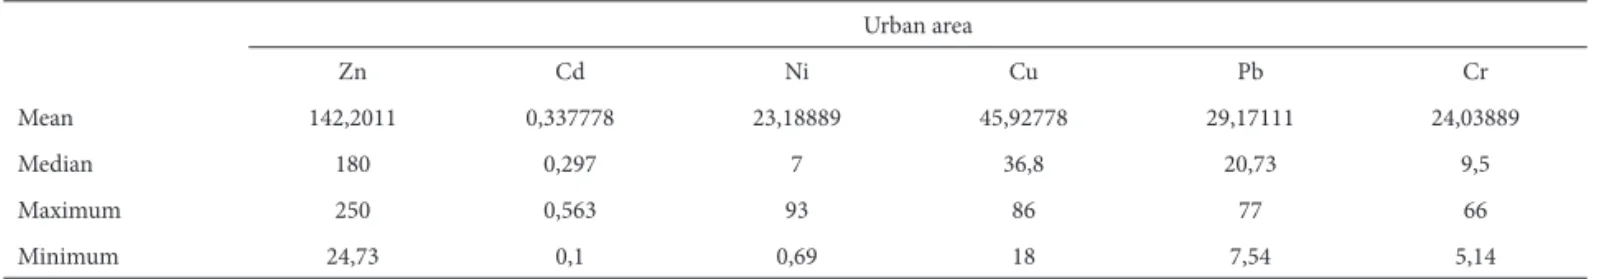 Table 1. Metal concentration in mosses (g.mg -1 ) in the urban area of Caxias do Sul (2003-2004) Urban area Zn Cd Ni Cu Pb Cr Mean 142,2011 0,337778 23,18889 45,92778 29,17111 24,03889 Median 180 0,297 7 36,8 20,73 9,5 Maximum 250 0,563 93 86 77 66 Minimu